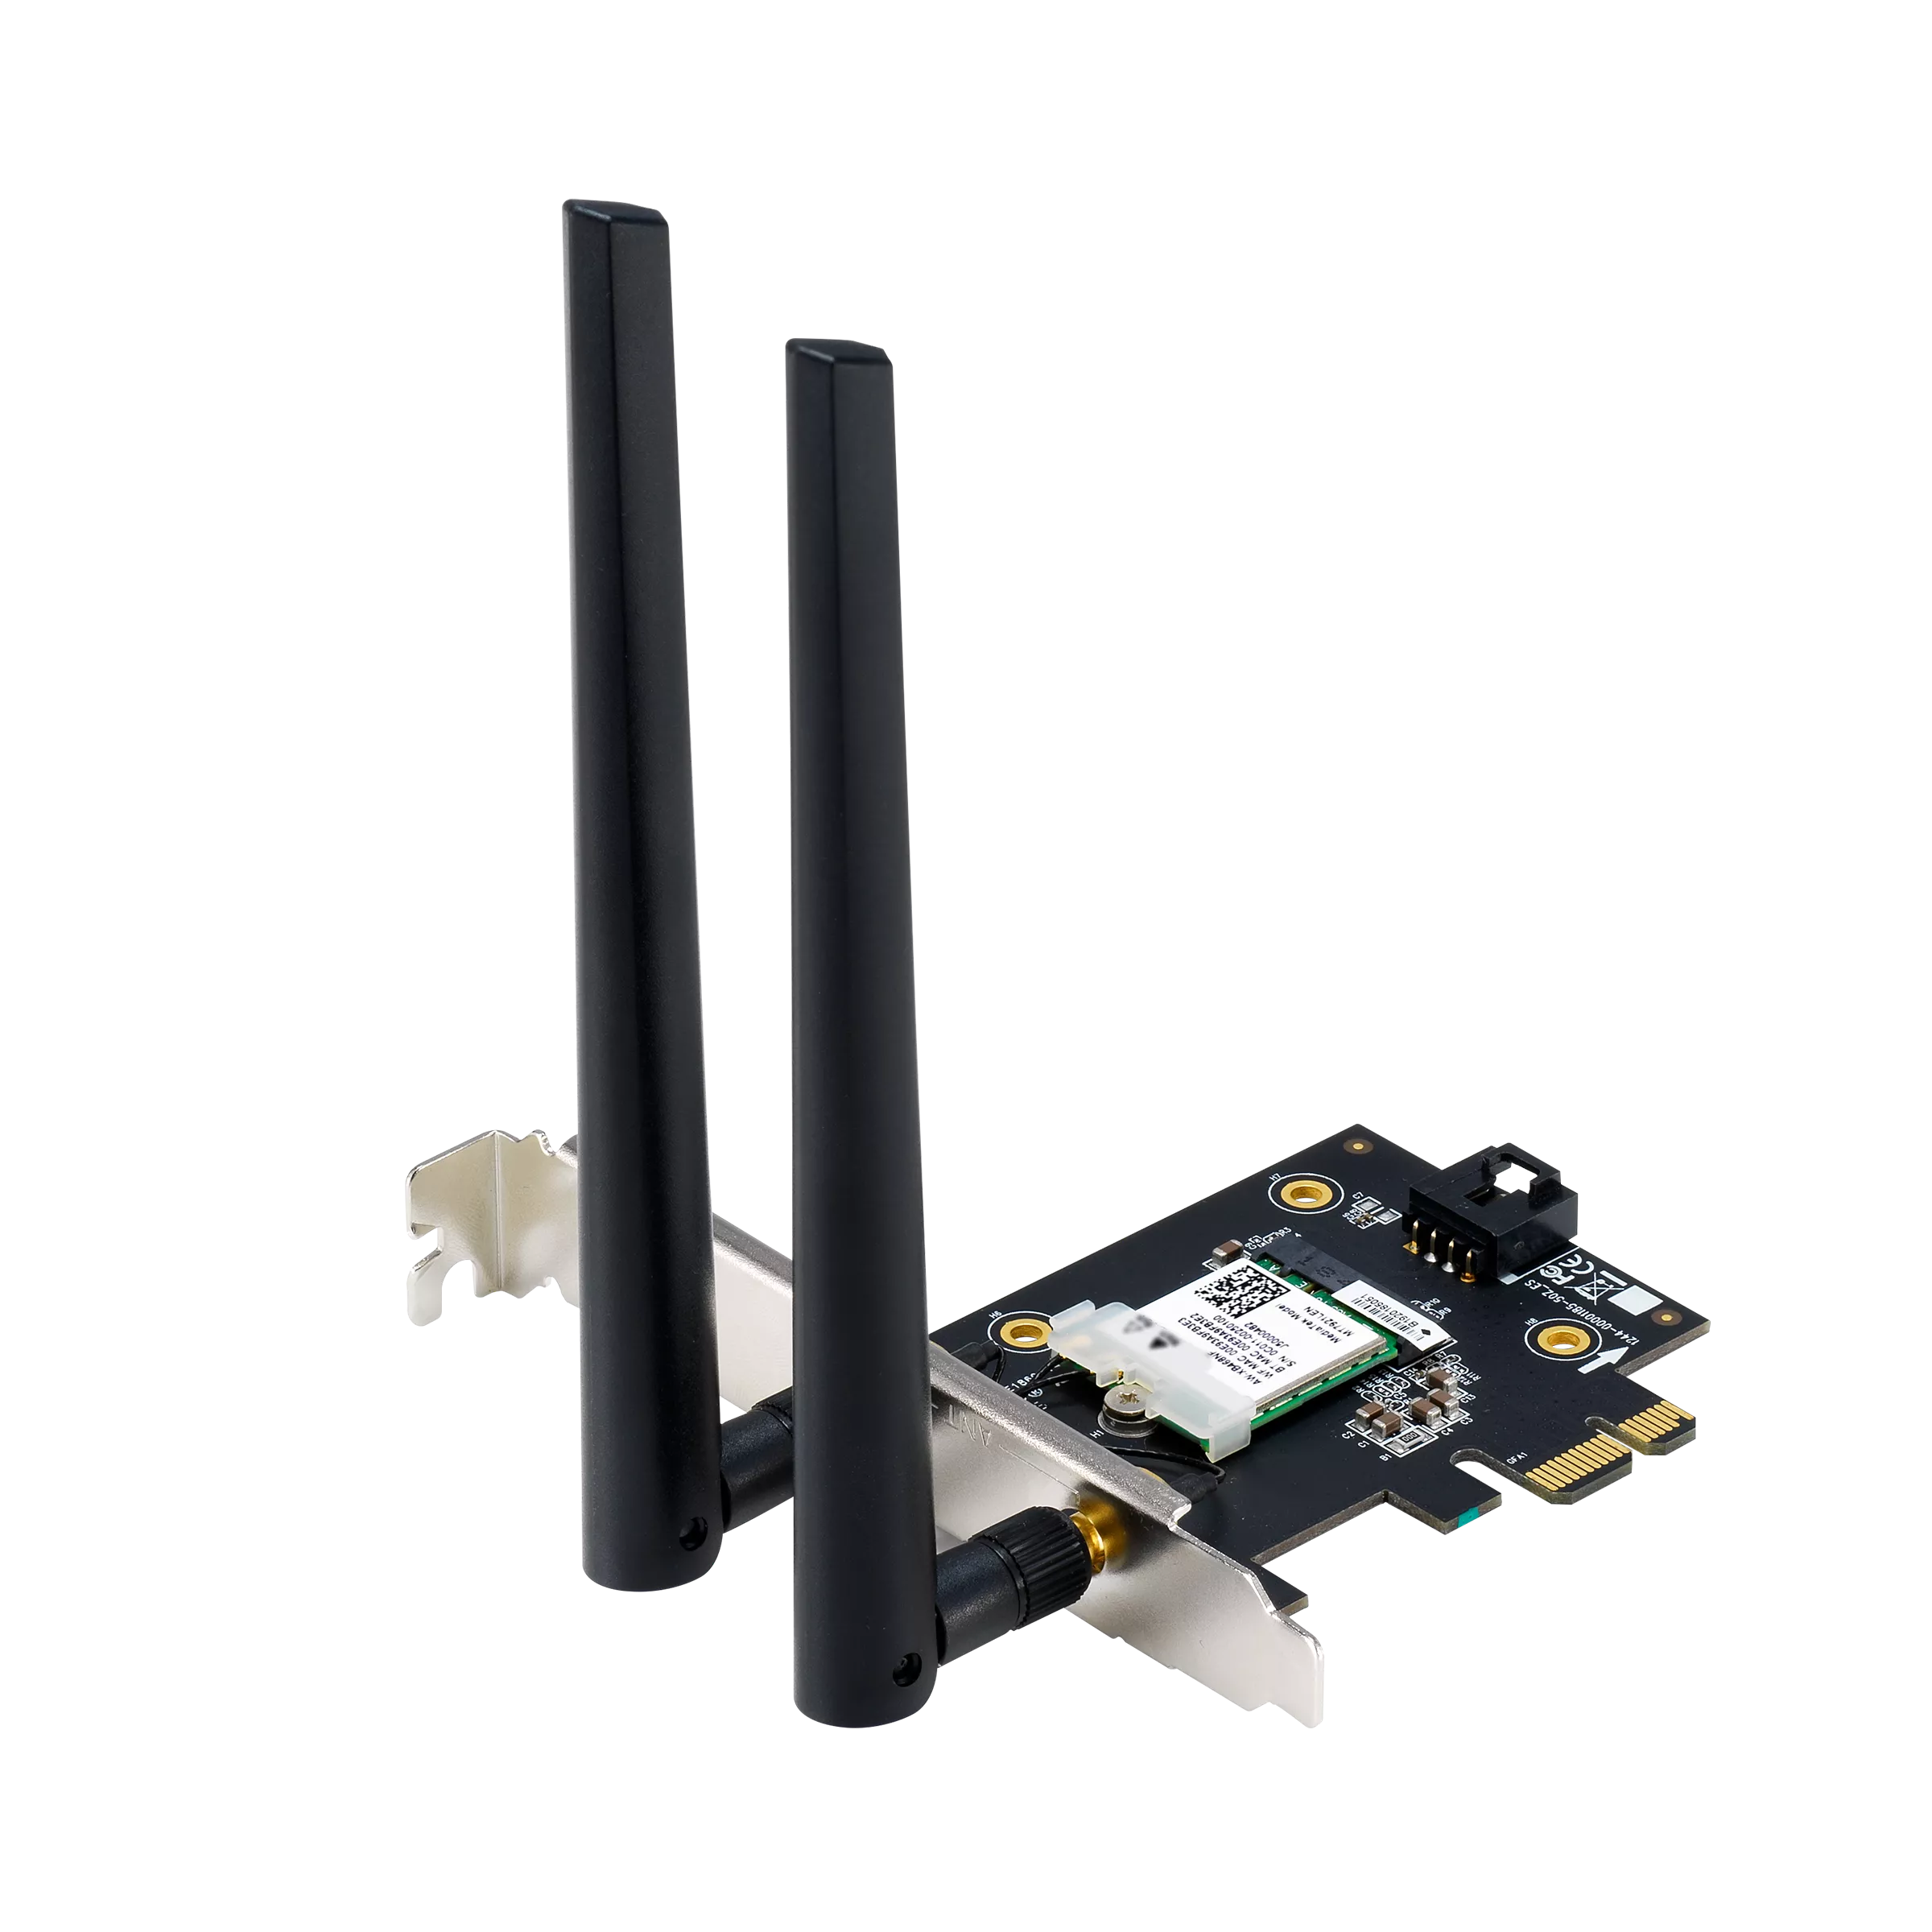   Wi-Fi Asus PCE-AXE5400 (90IG07I0-ME0B10)